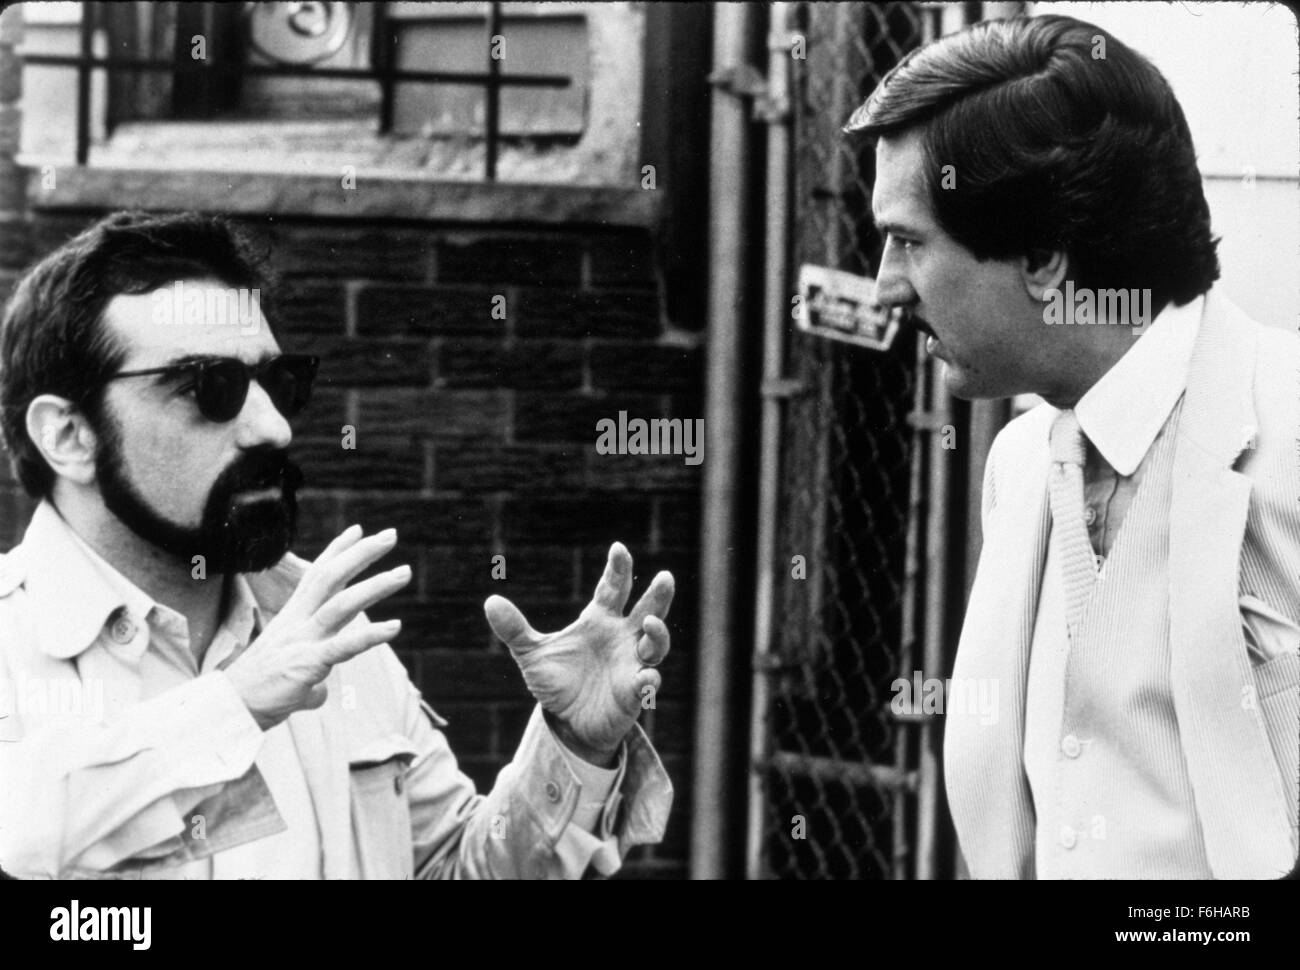 RELEASE DATE: February 18, 1983  MOVIE TITLE: The King of Comedy  DIRECTOR: Martin Scorsese  STUDIO: 20th Century Fox  PLOT: Aspiring comic Rupert Pupkin wants to achieve success in showbiz, by resorting to stalking his idol, a late night talk show host who craves his own privacy  PICTURED: ROBERT DE NIRO as Rupert Pupkin  (Credit Image: c 20th Century Fox/Entertainment Pictures) Stock Photo